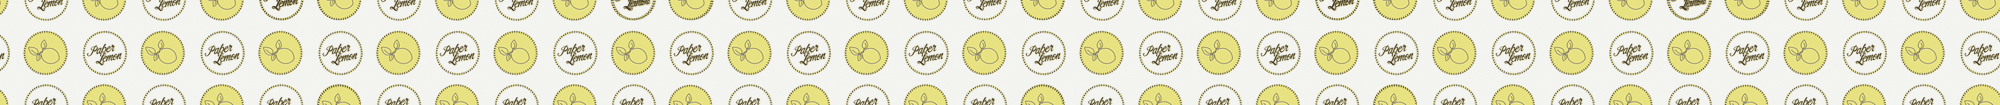 Pattern_Banner3.png